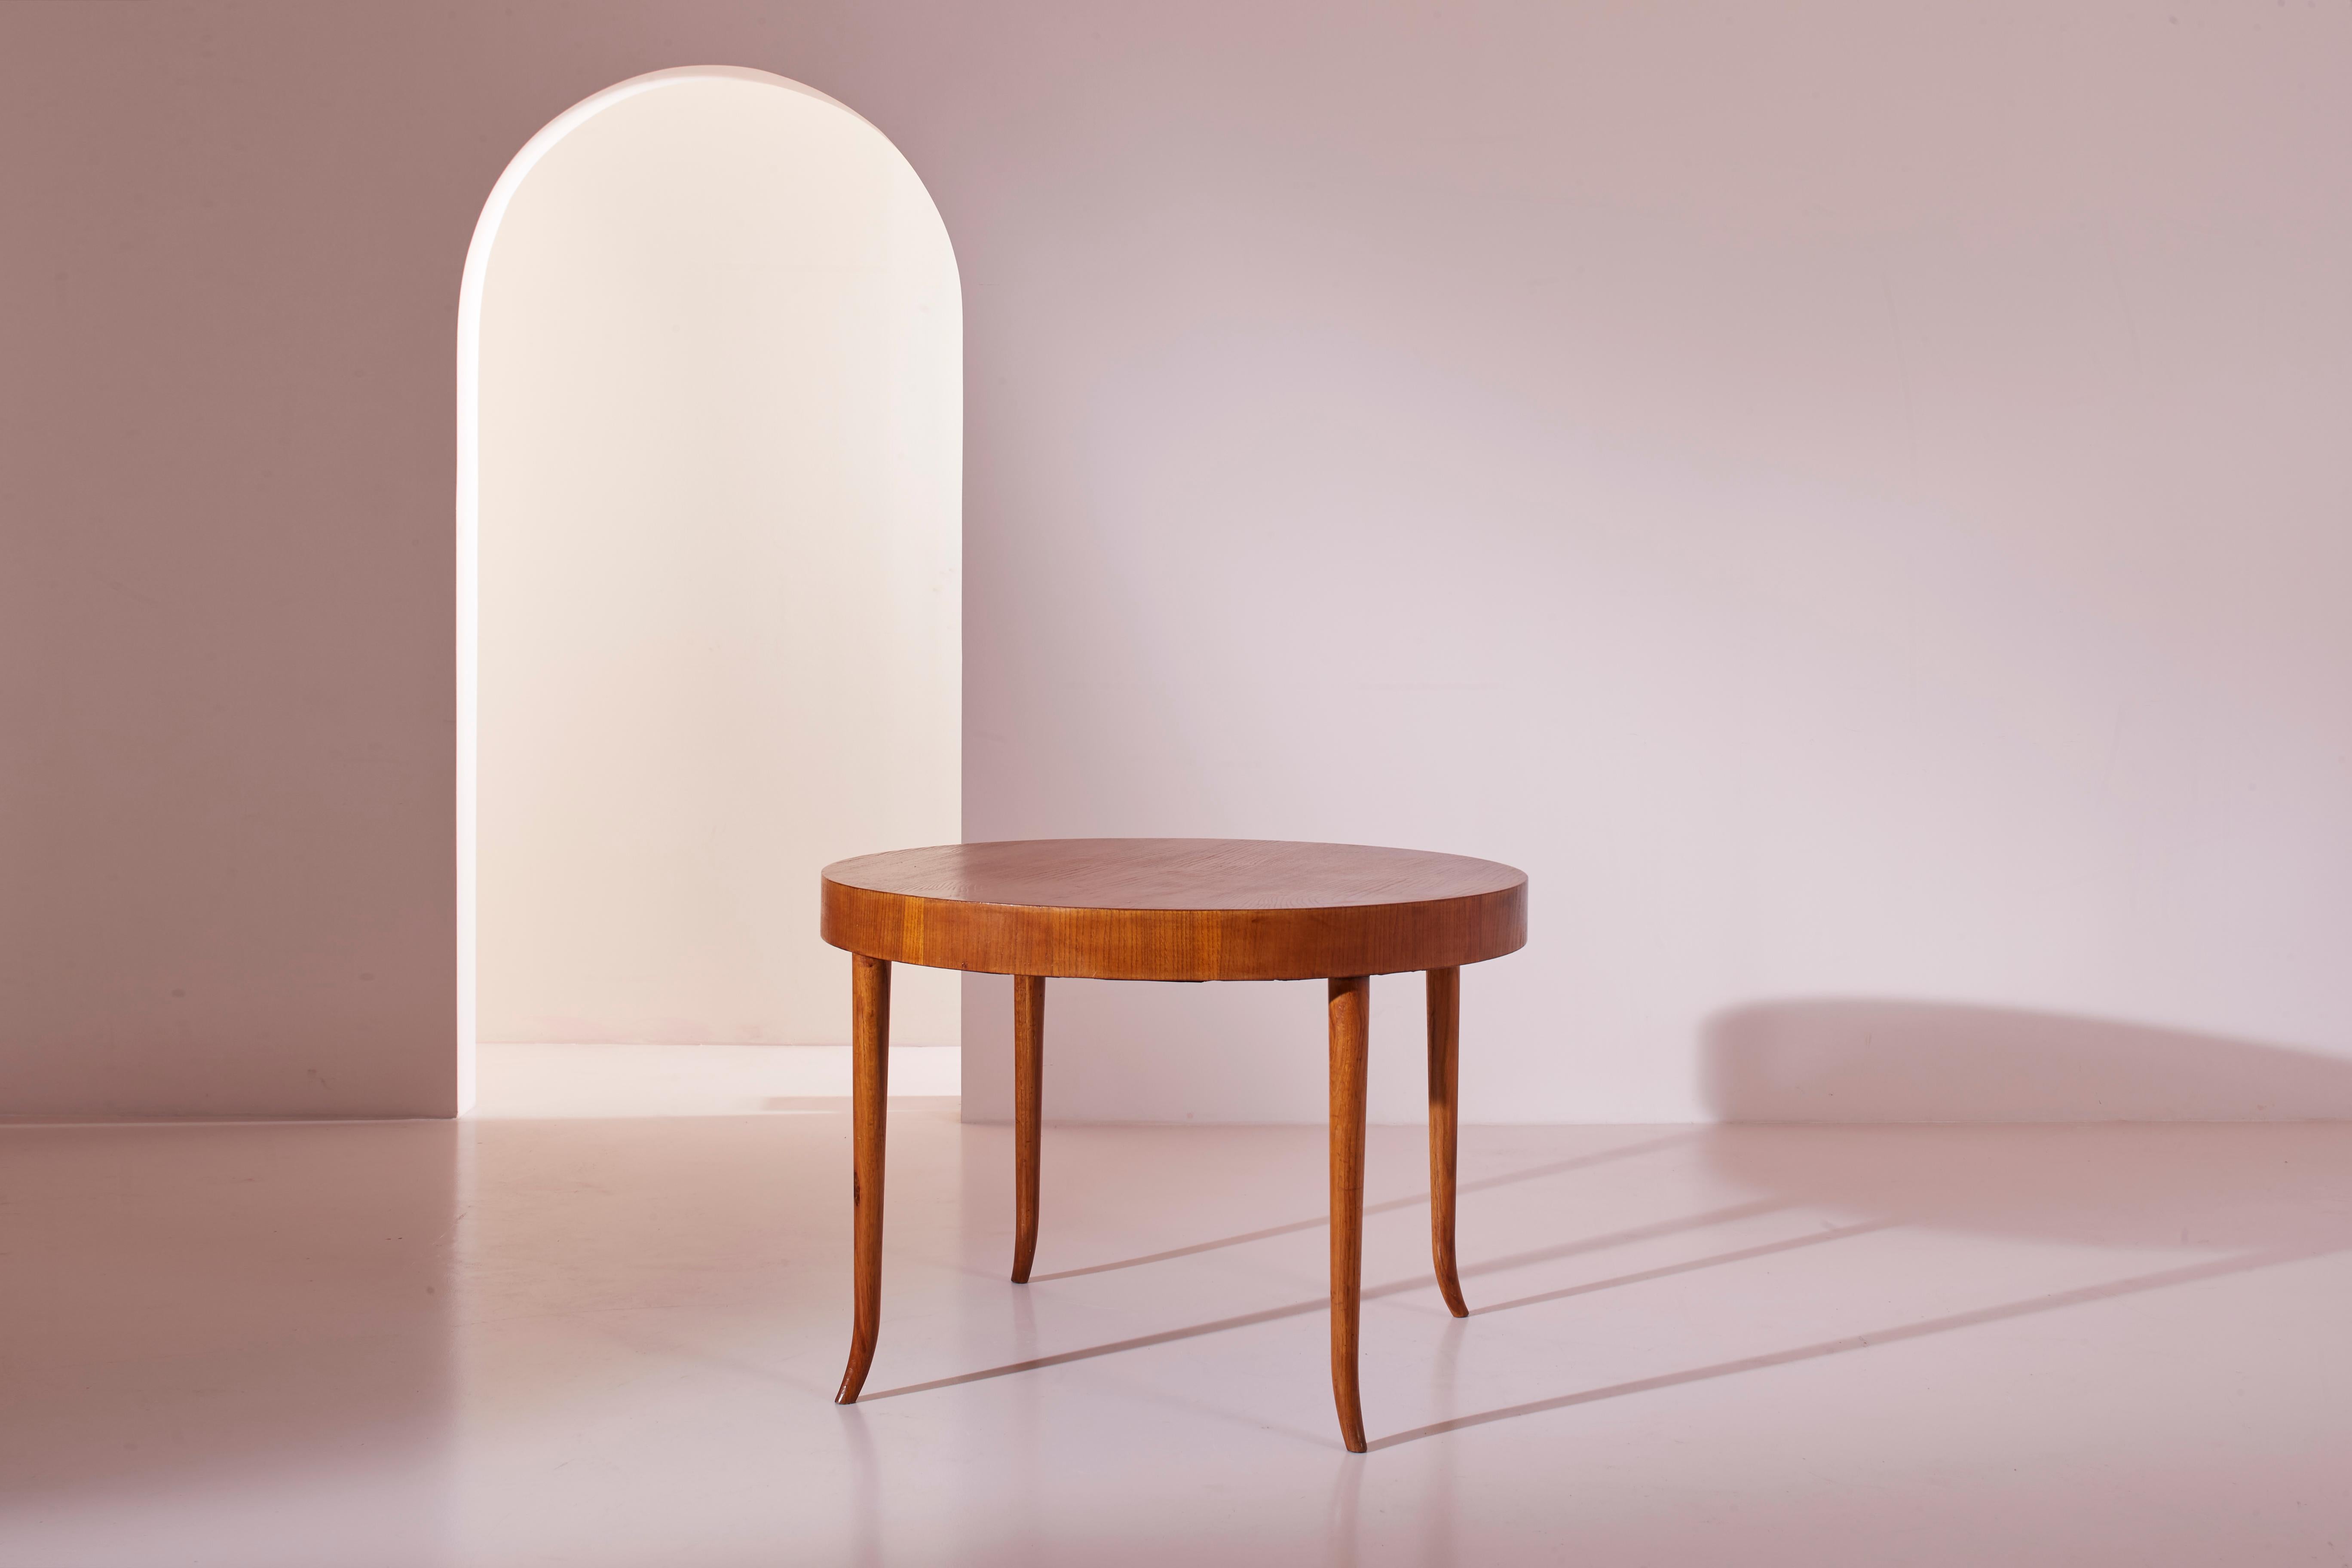 Round oak wood table, designed by Guglielmo Ulrich, Italian craftsmanship, from the 1940s.
A disk of wood with an unusual thickness, embellished by the natural veins of the material, is the distinctive top of a table designed by Guglielmo Ulrich in